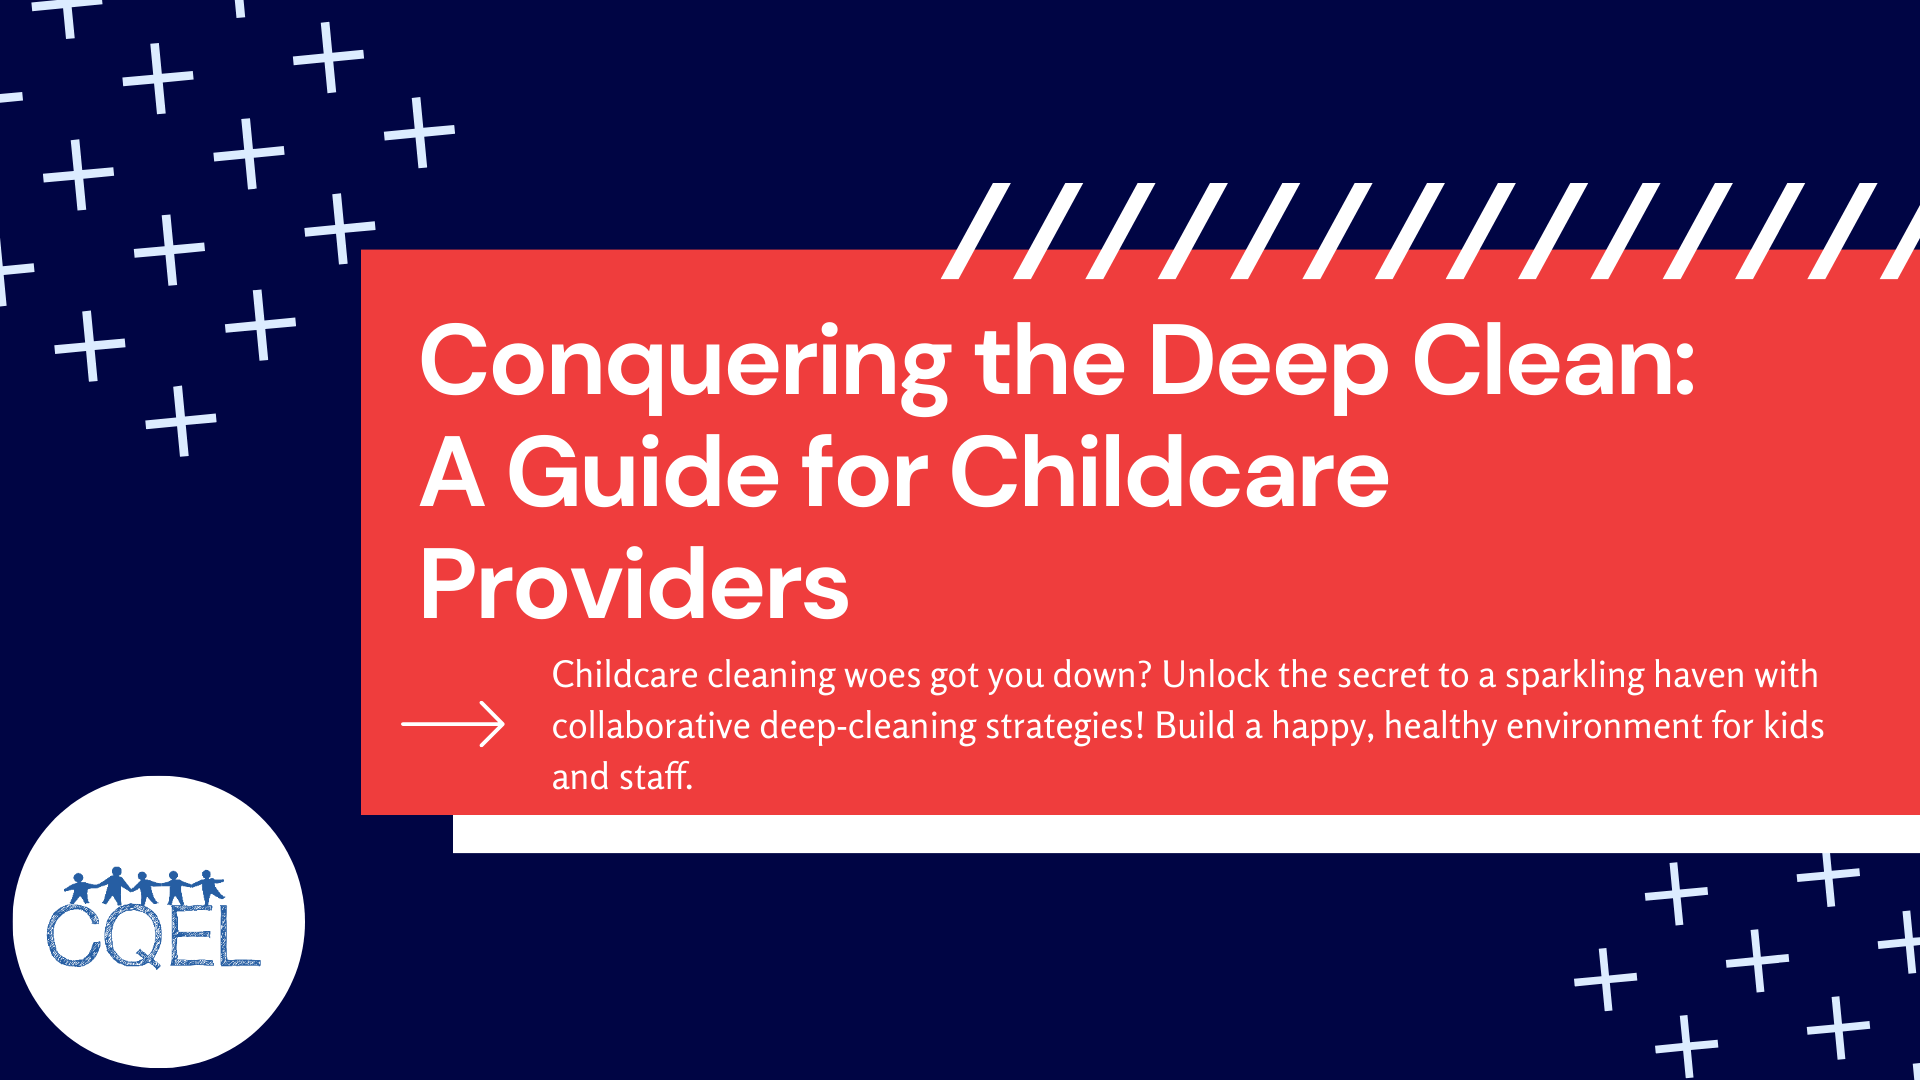 Conquering the Deep Clean: A Guide for Childcare Providers